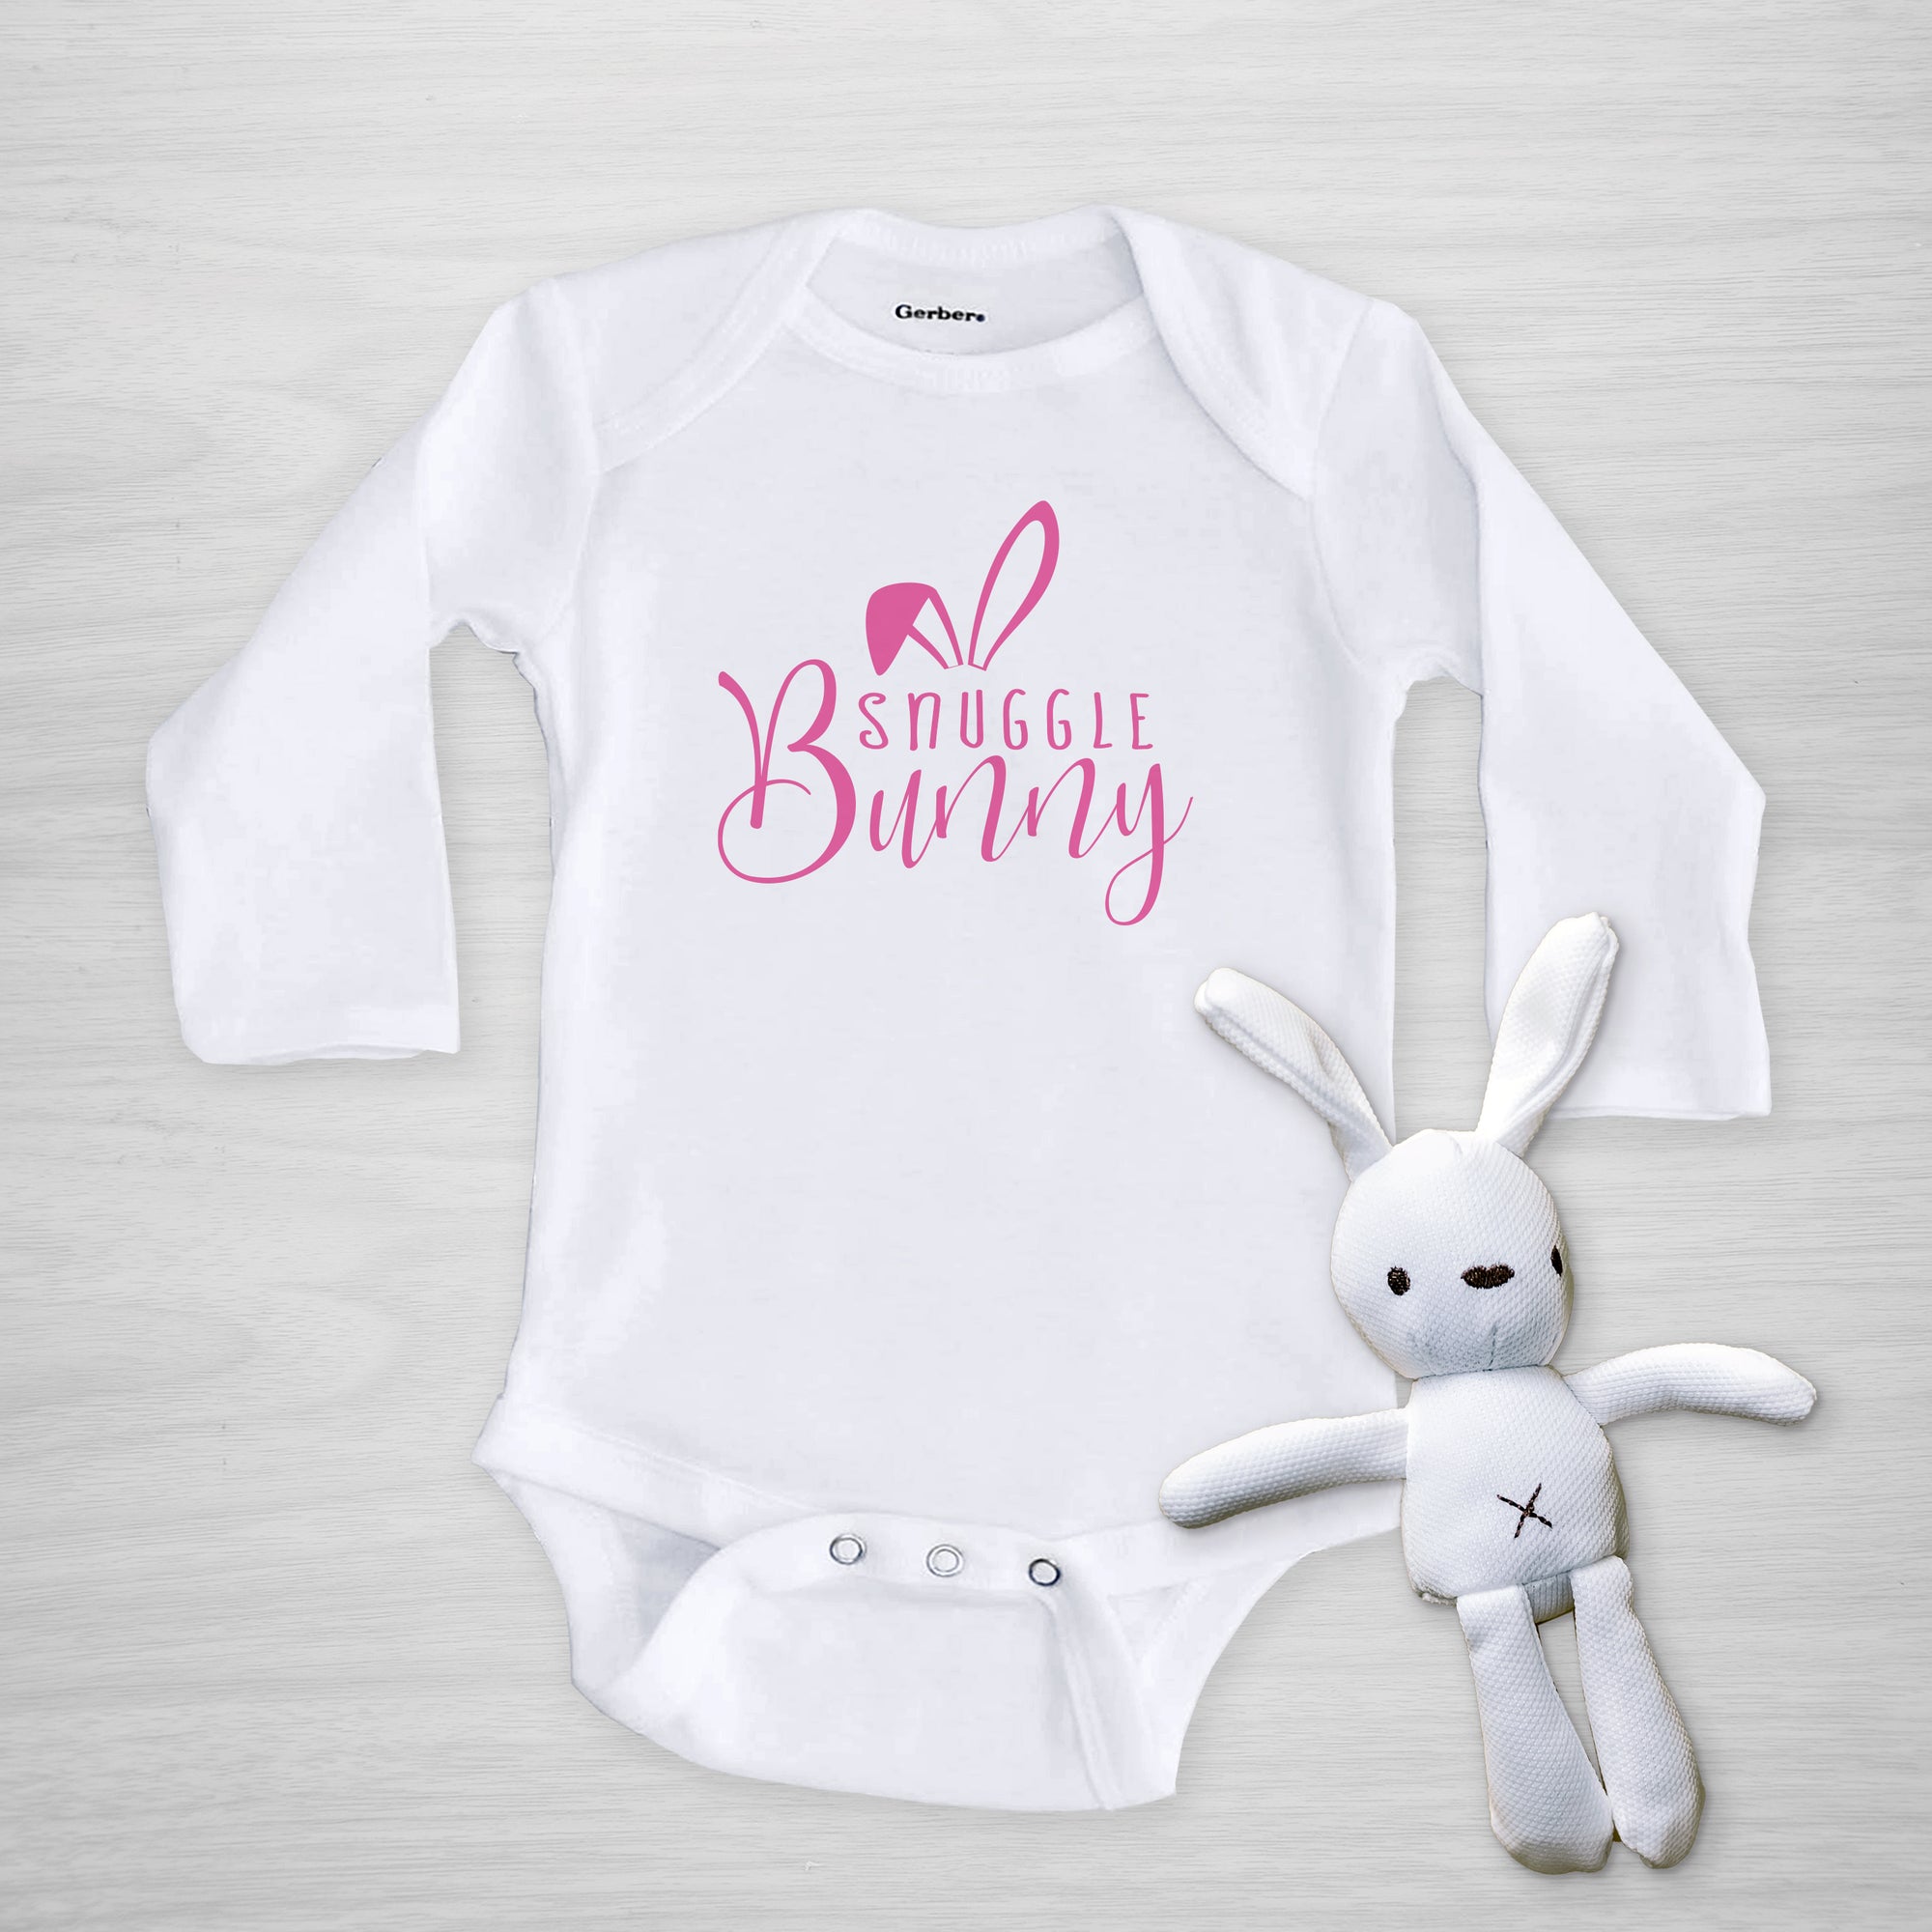 Snuggle Bunny Gerber Onesie®, Printed with super soft inks in our Nashville Studio, Pick any graphic color, long sleeved